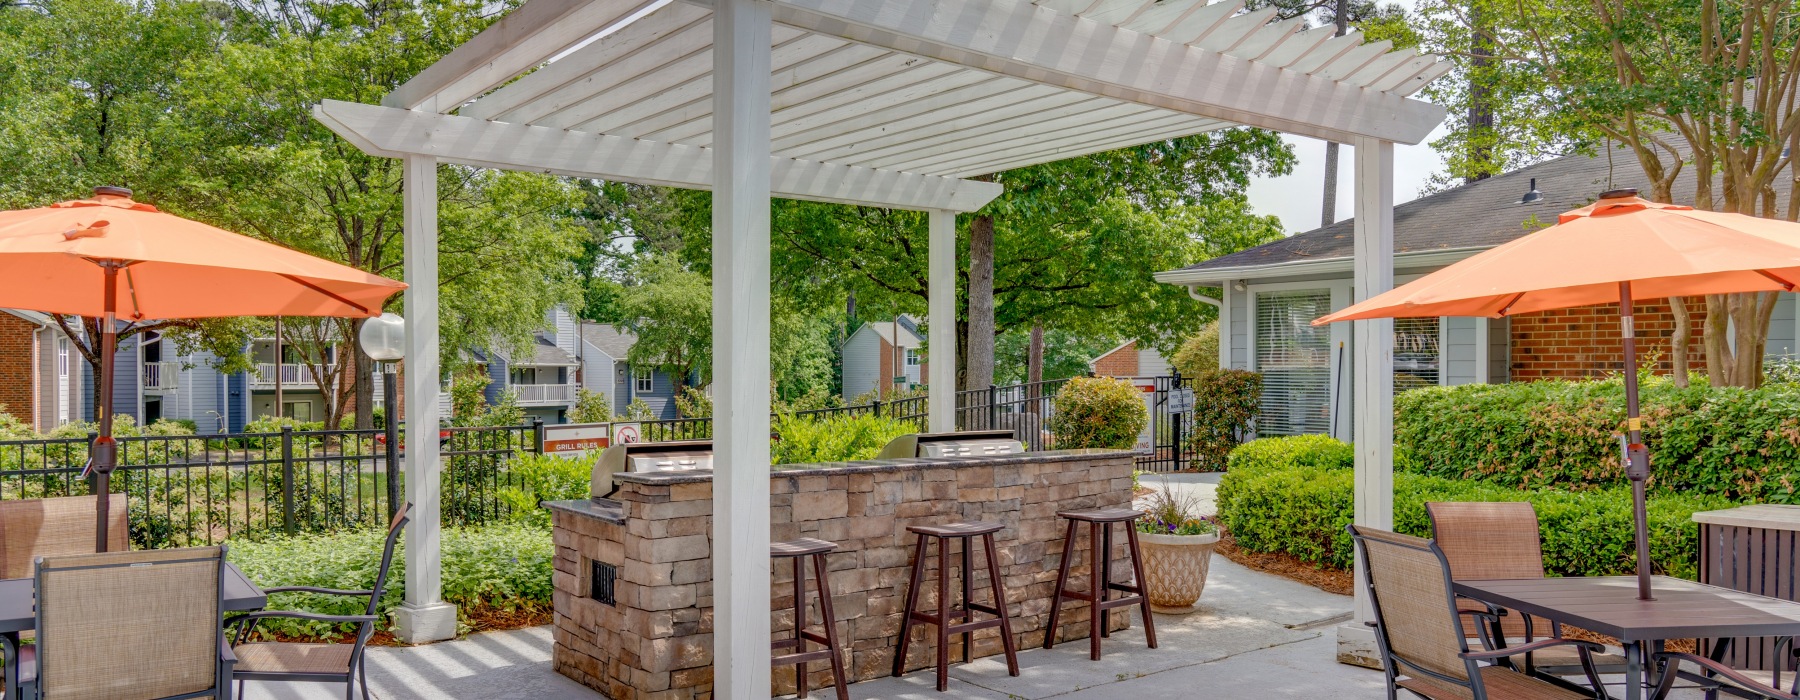 pergola over a grill and high-top chairs